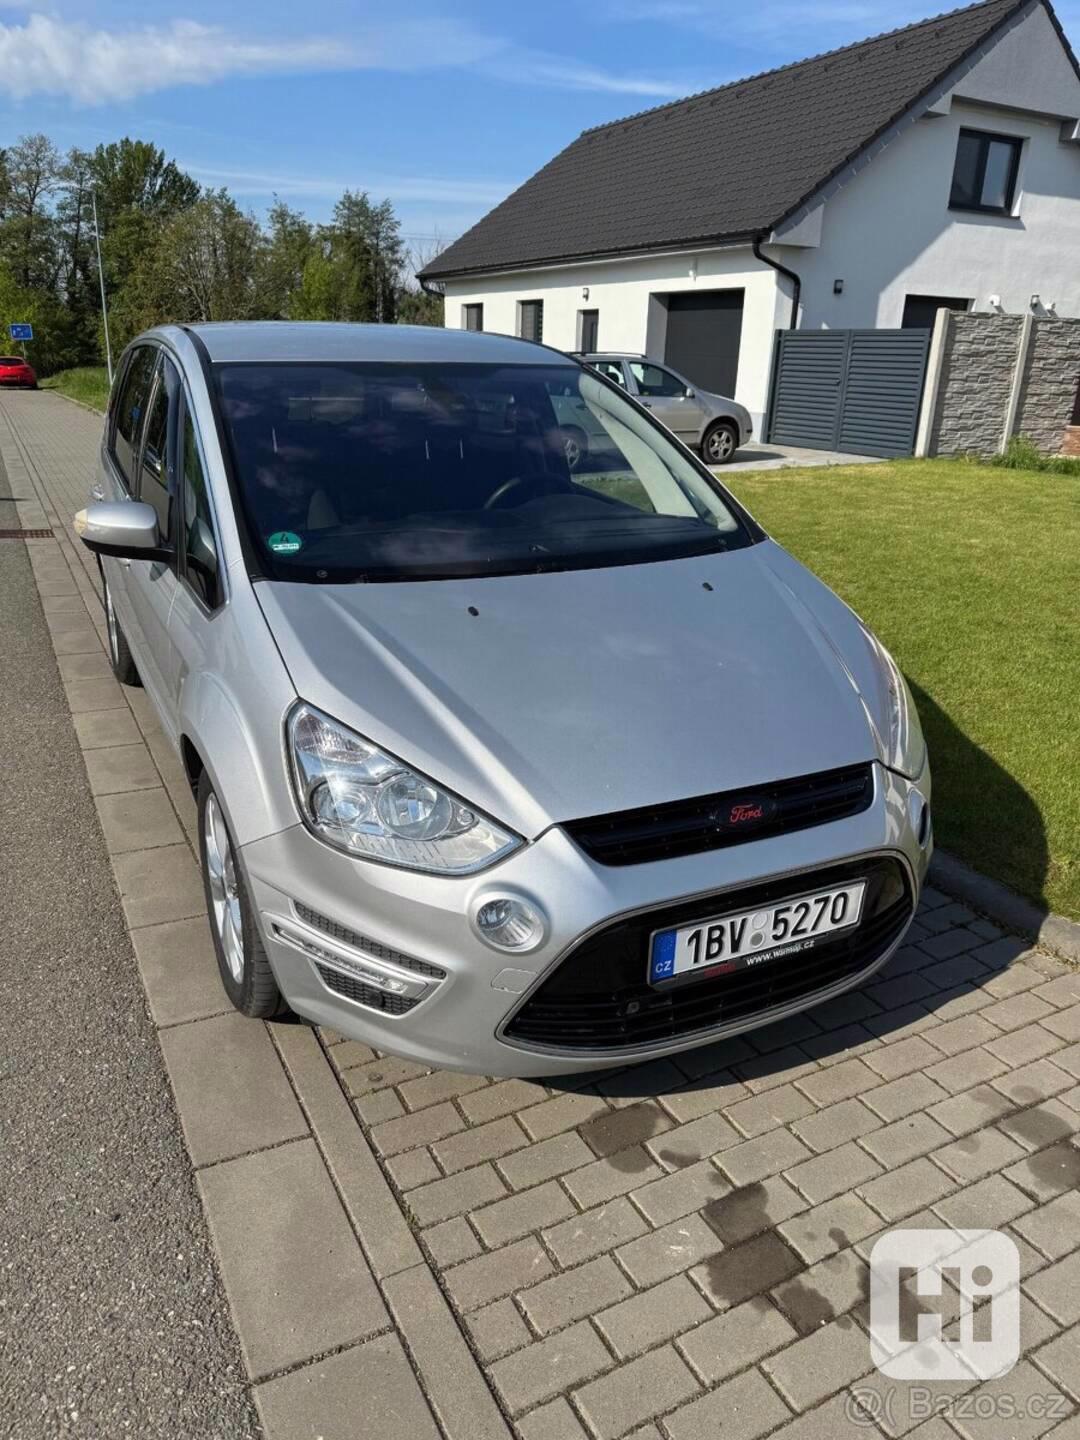 FORD S-max 2.0 TDCi 103 kW 